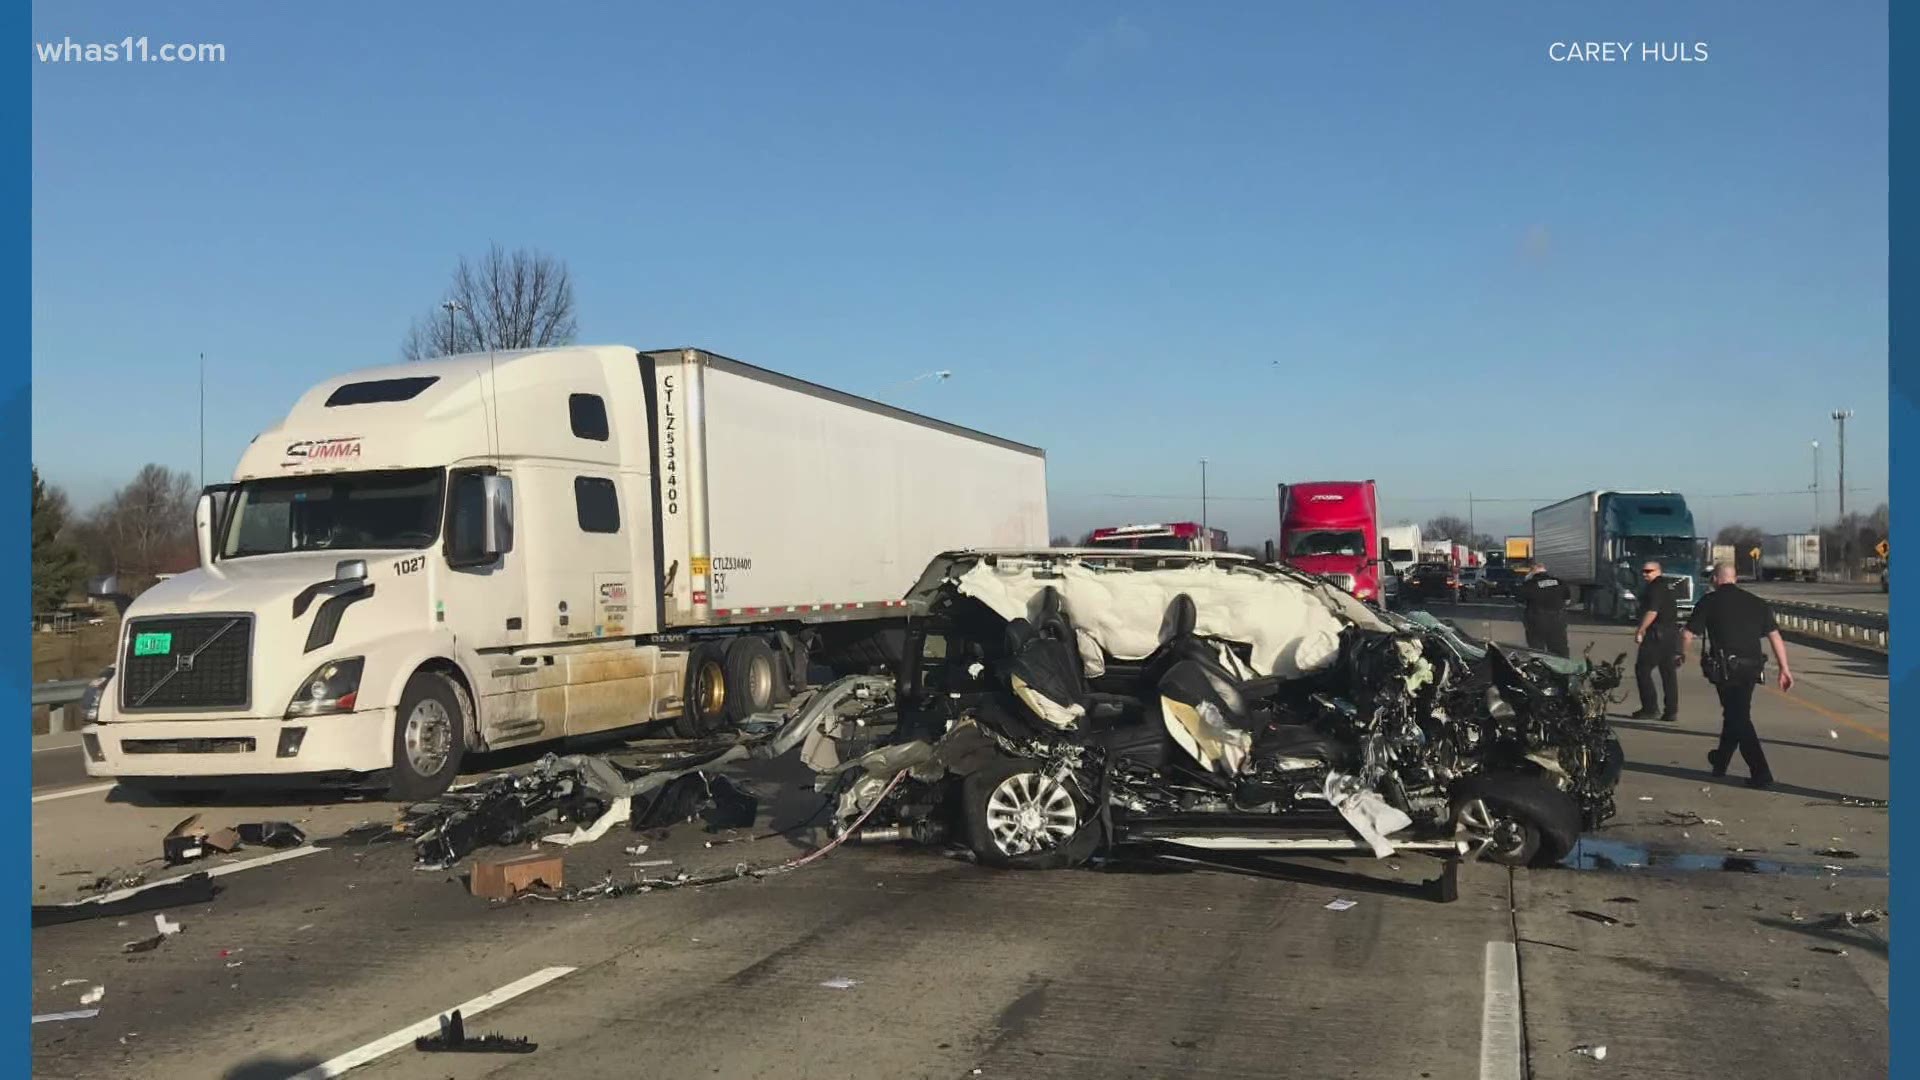 The woman, who was entering the interstate, may have been distracted when she slammed into the rear of a tractor trailer on Jan. 21.